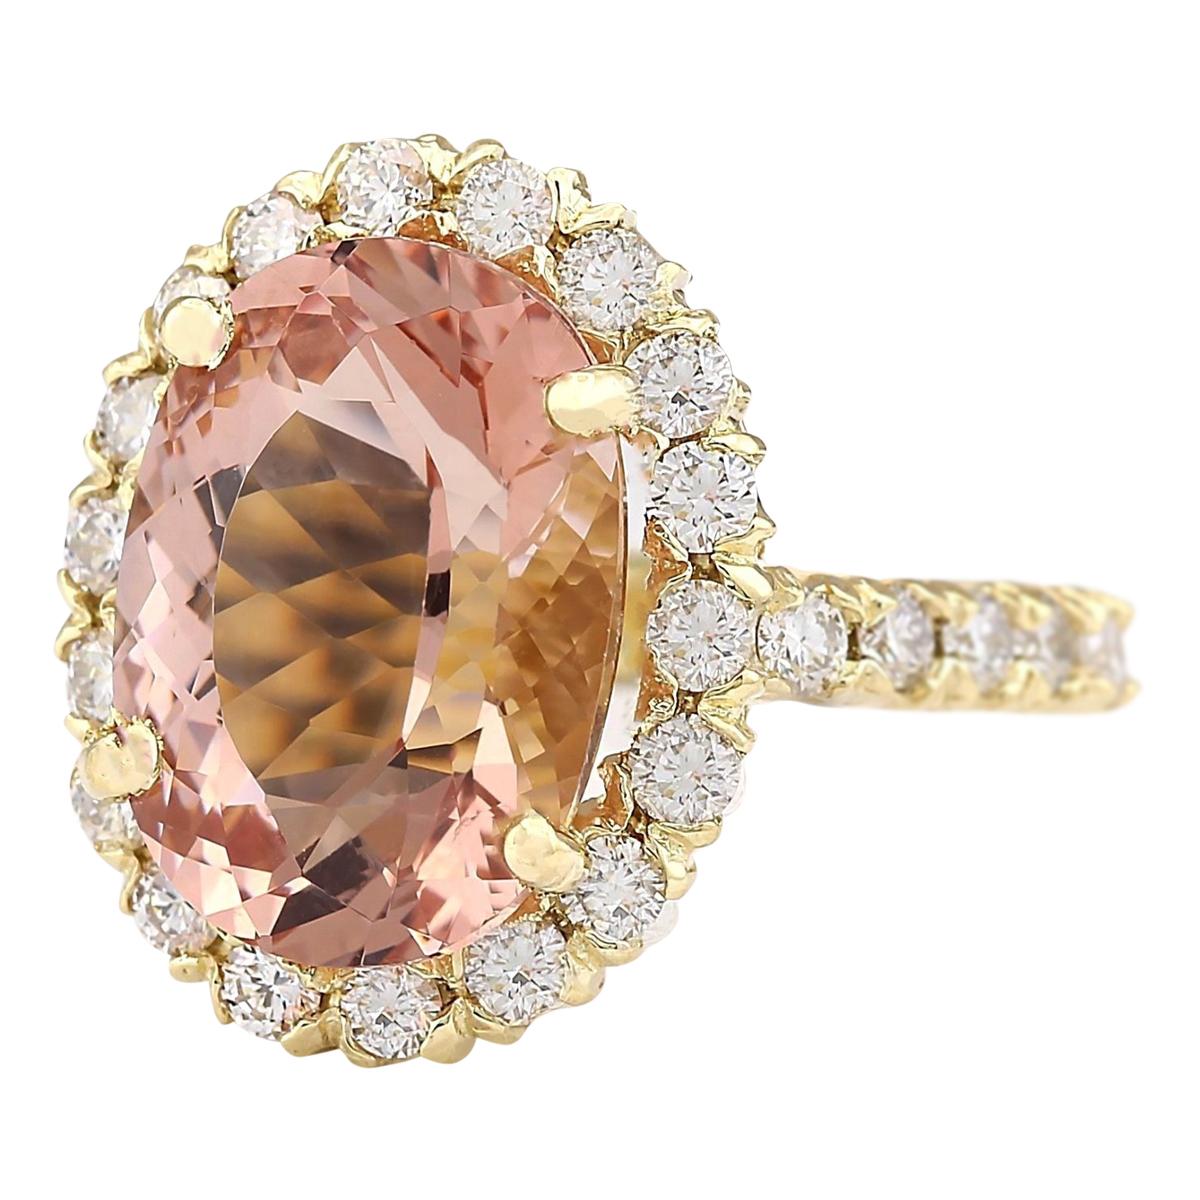 Stamped: 14K Yellow Gold
Total Ring Weight: 7.5 Grams
Total Natural Morganite Weight is 7.58 Carat (Measures: 15.00x11.00 mm)
Color: Peach
Total Natural Diamond Weight is 1.21 Carat
Color: F-G, Clarity: VS2-SI1
Face Measures: 19.30x16.00 mm
Sku: